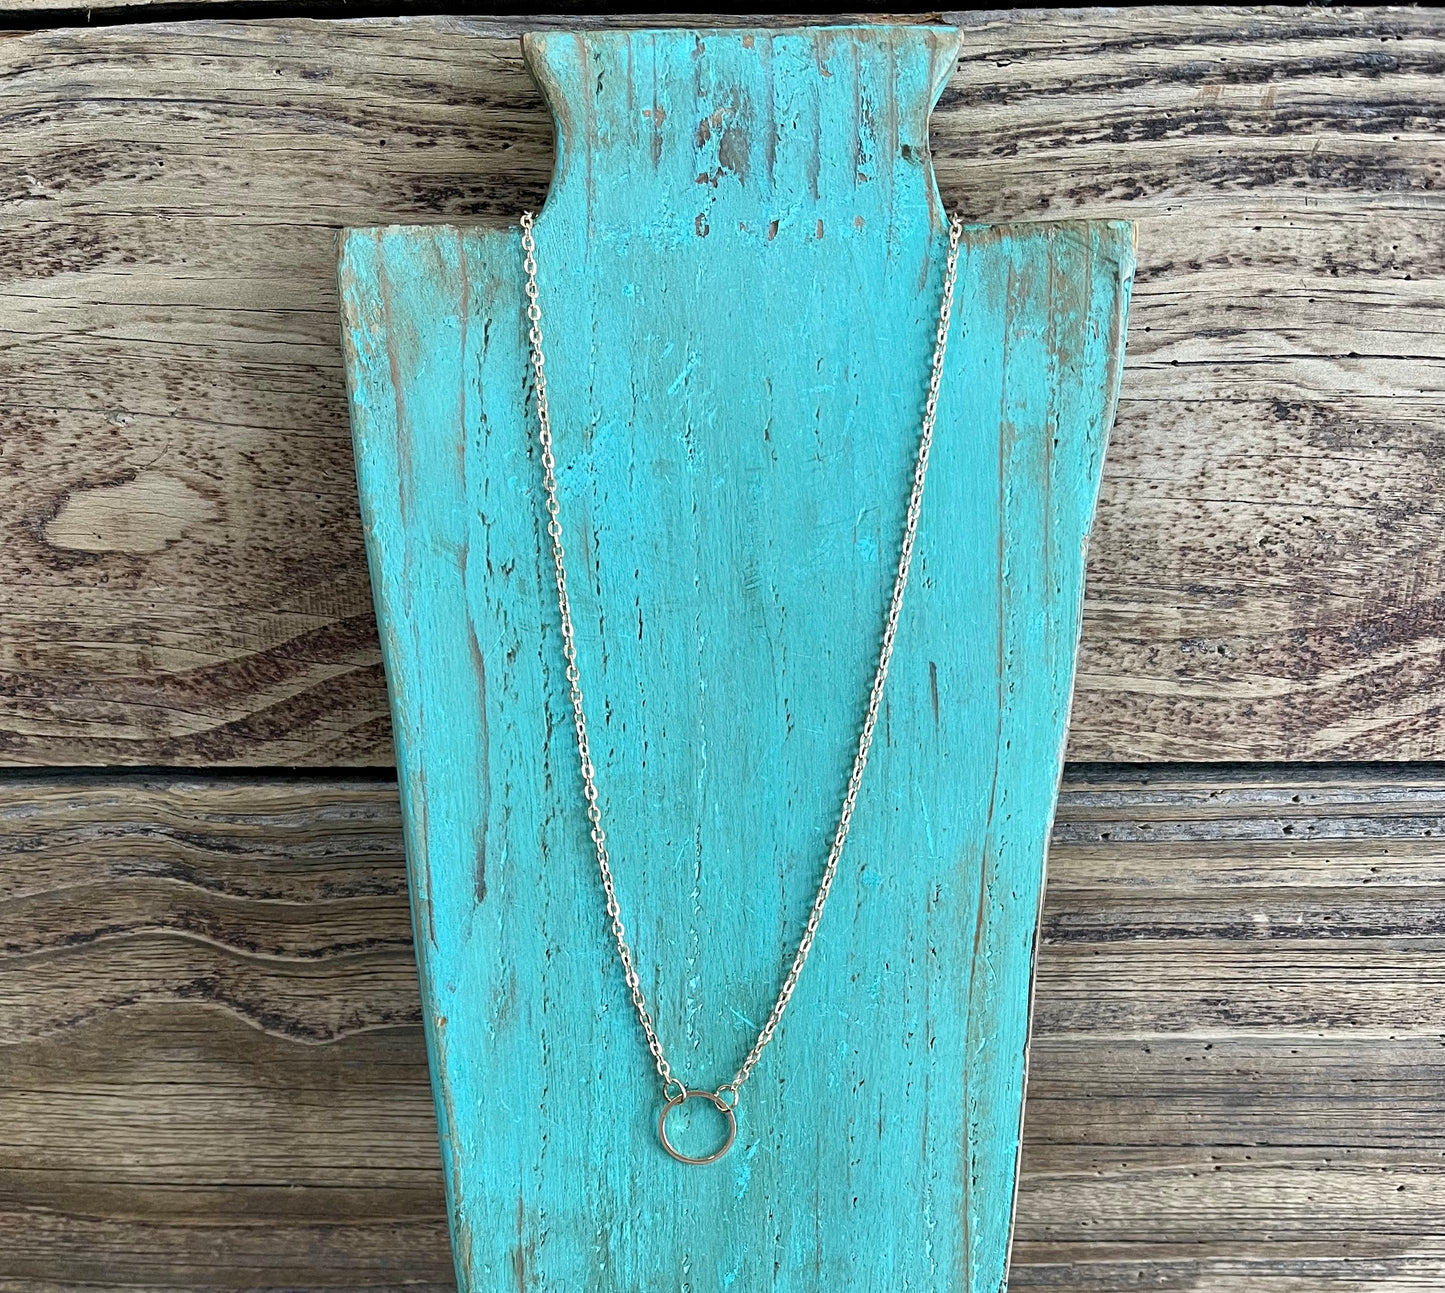 Simple gold ring necklace